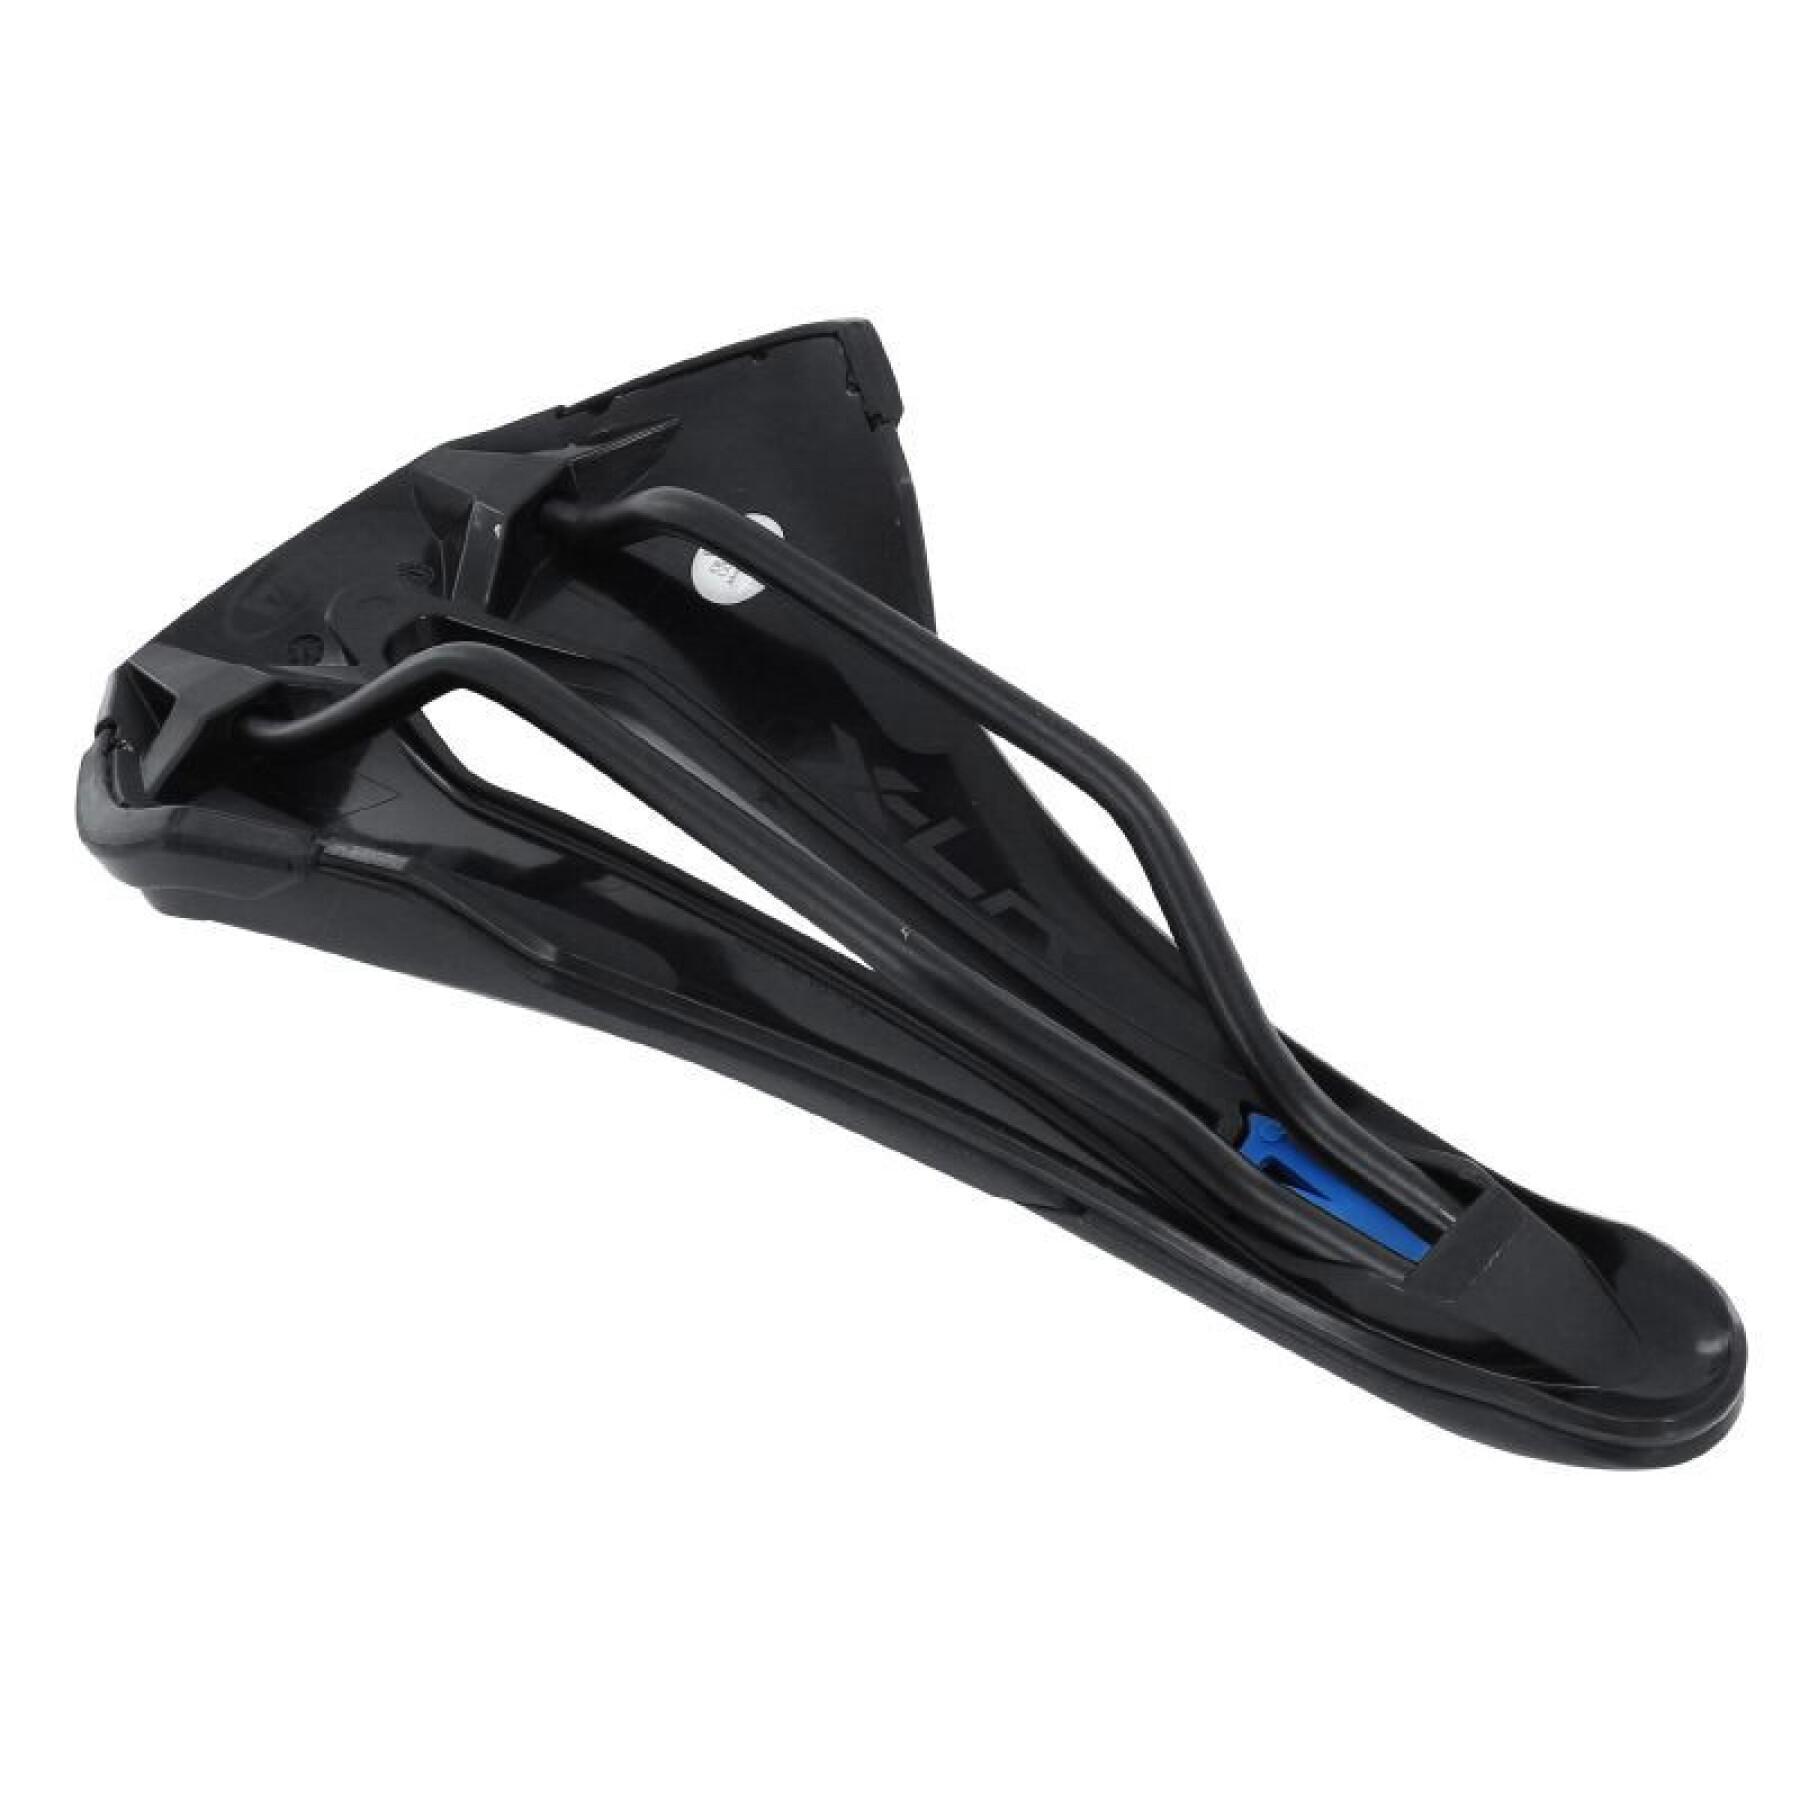 Selle route chassis manganese Selle Italia X-LR Superflow-Cross 250 grs